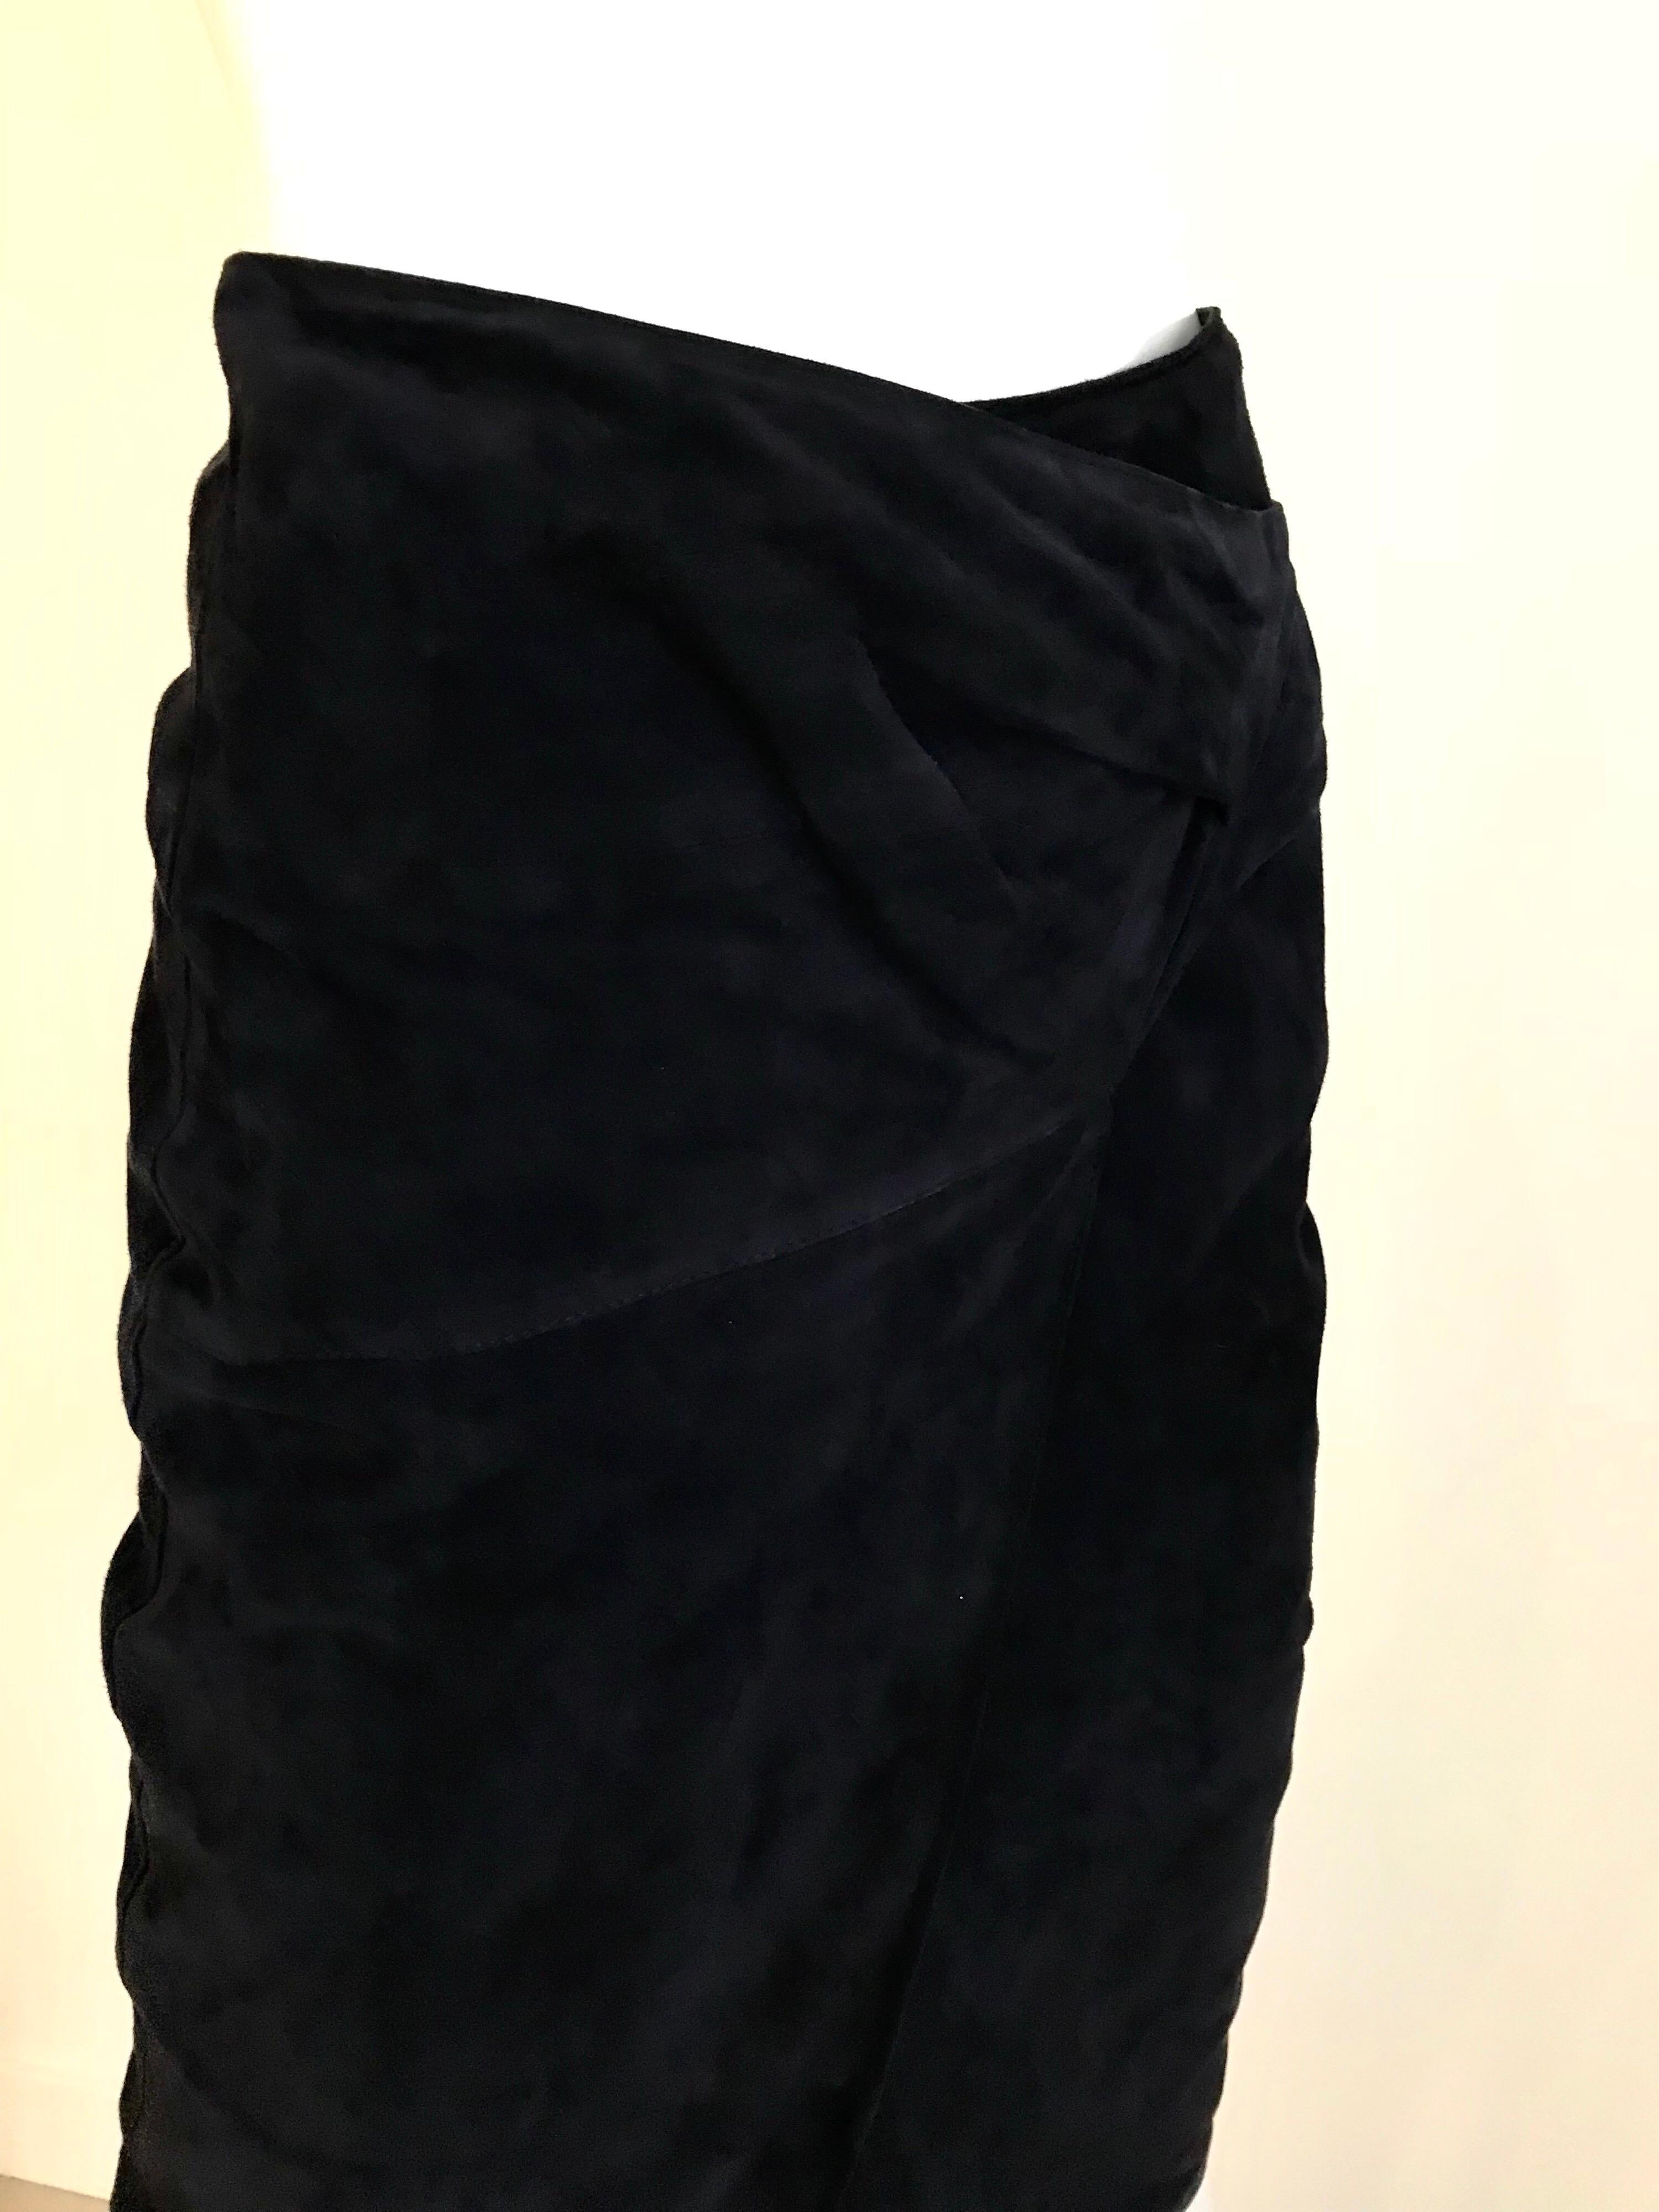 This 1980’s Gianfranco Ferre navy suede wrap skirt is simple but sexy!  Ferre’s workmanship is second to none, you really feel the quality in the cut and stitching on this piece.  The suede feels great!

Skirt waist: 25 inches/ Hip: 34 inches/ skirt